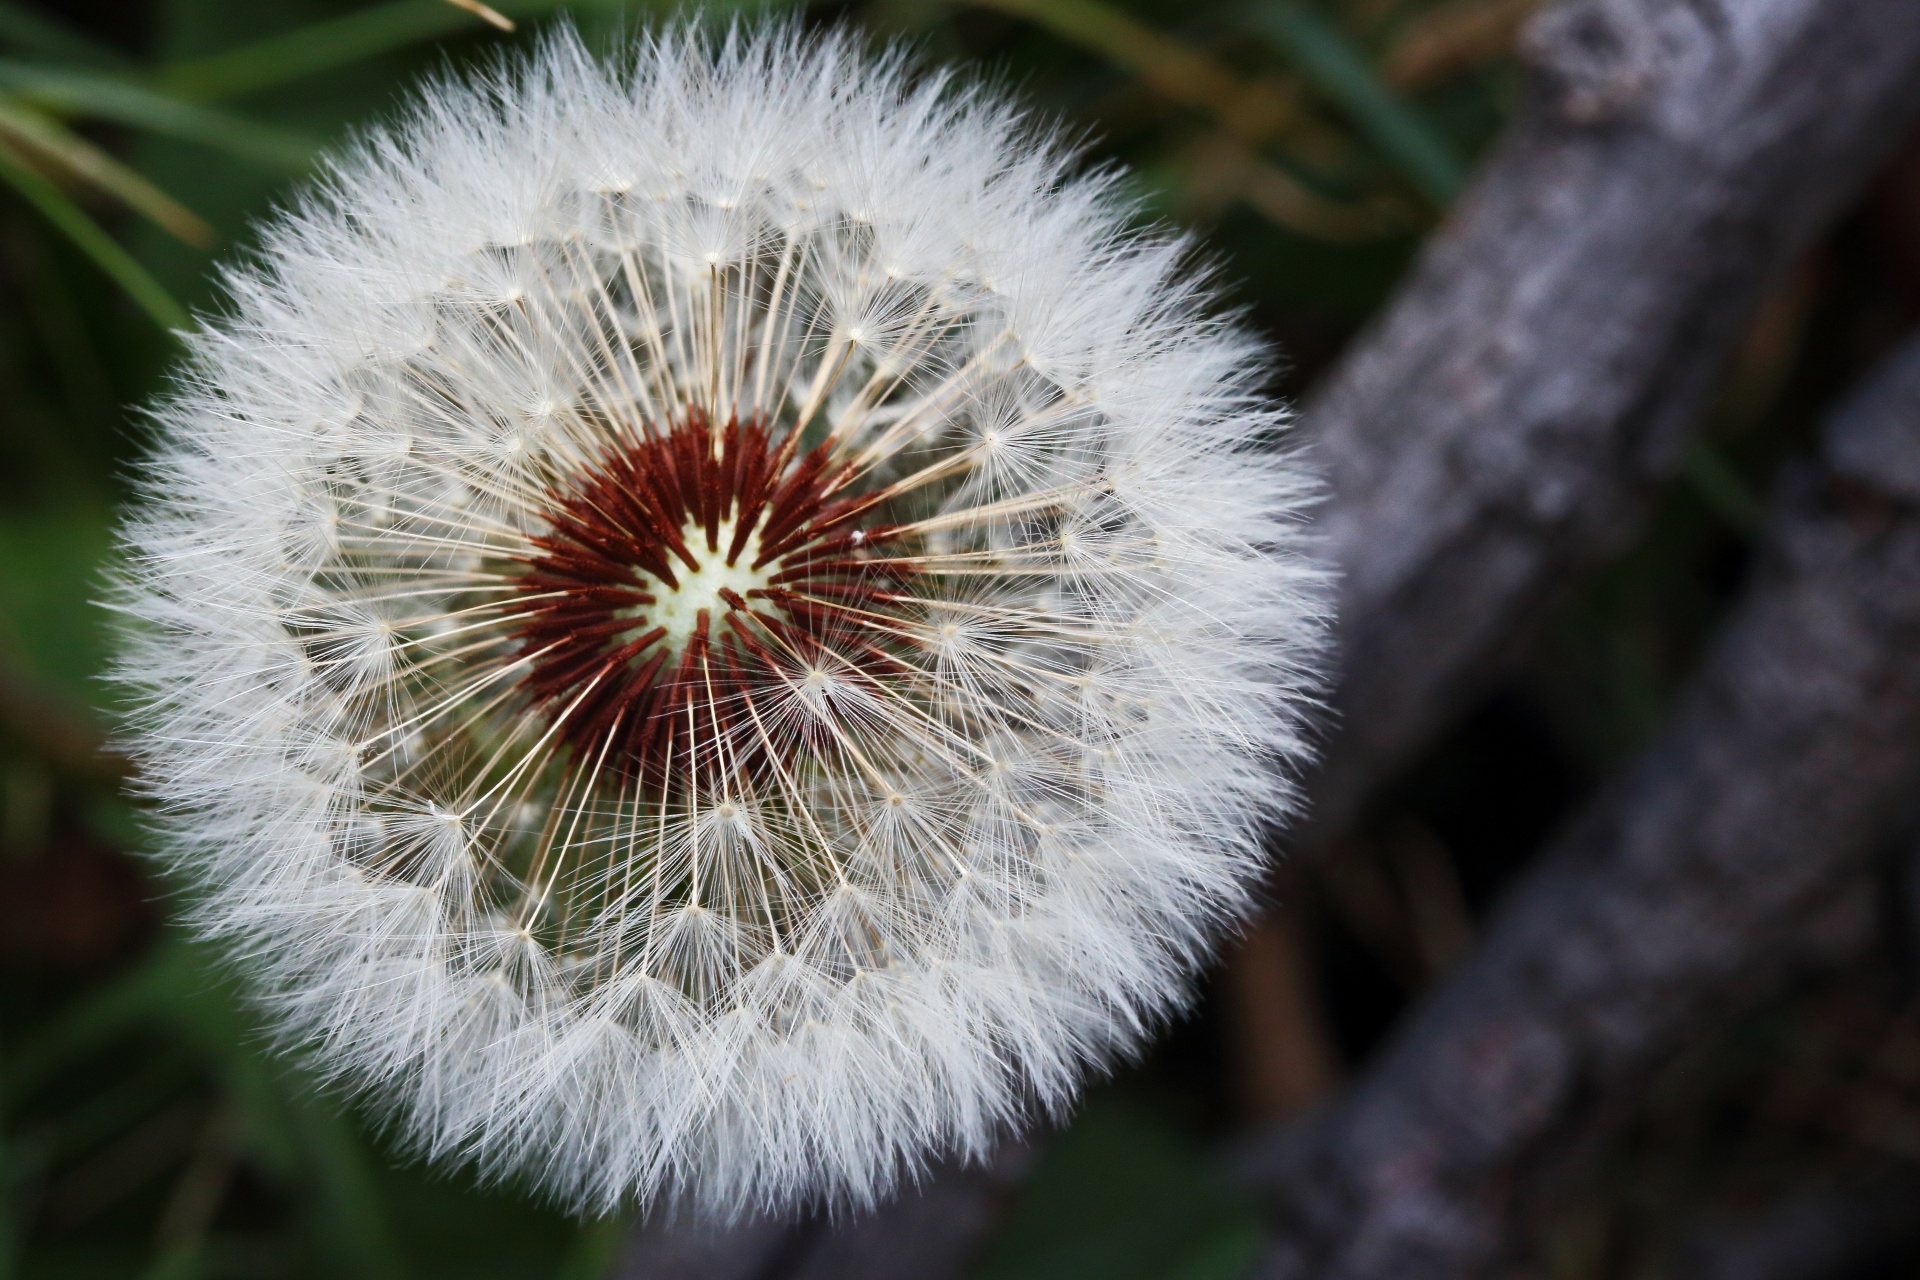 seed tufts on a white dandelion seed head